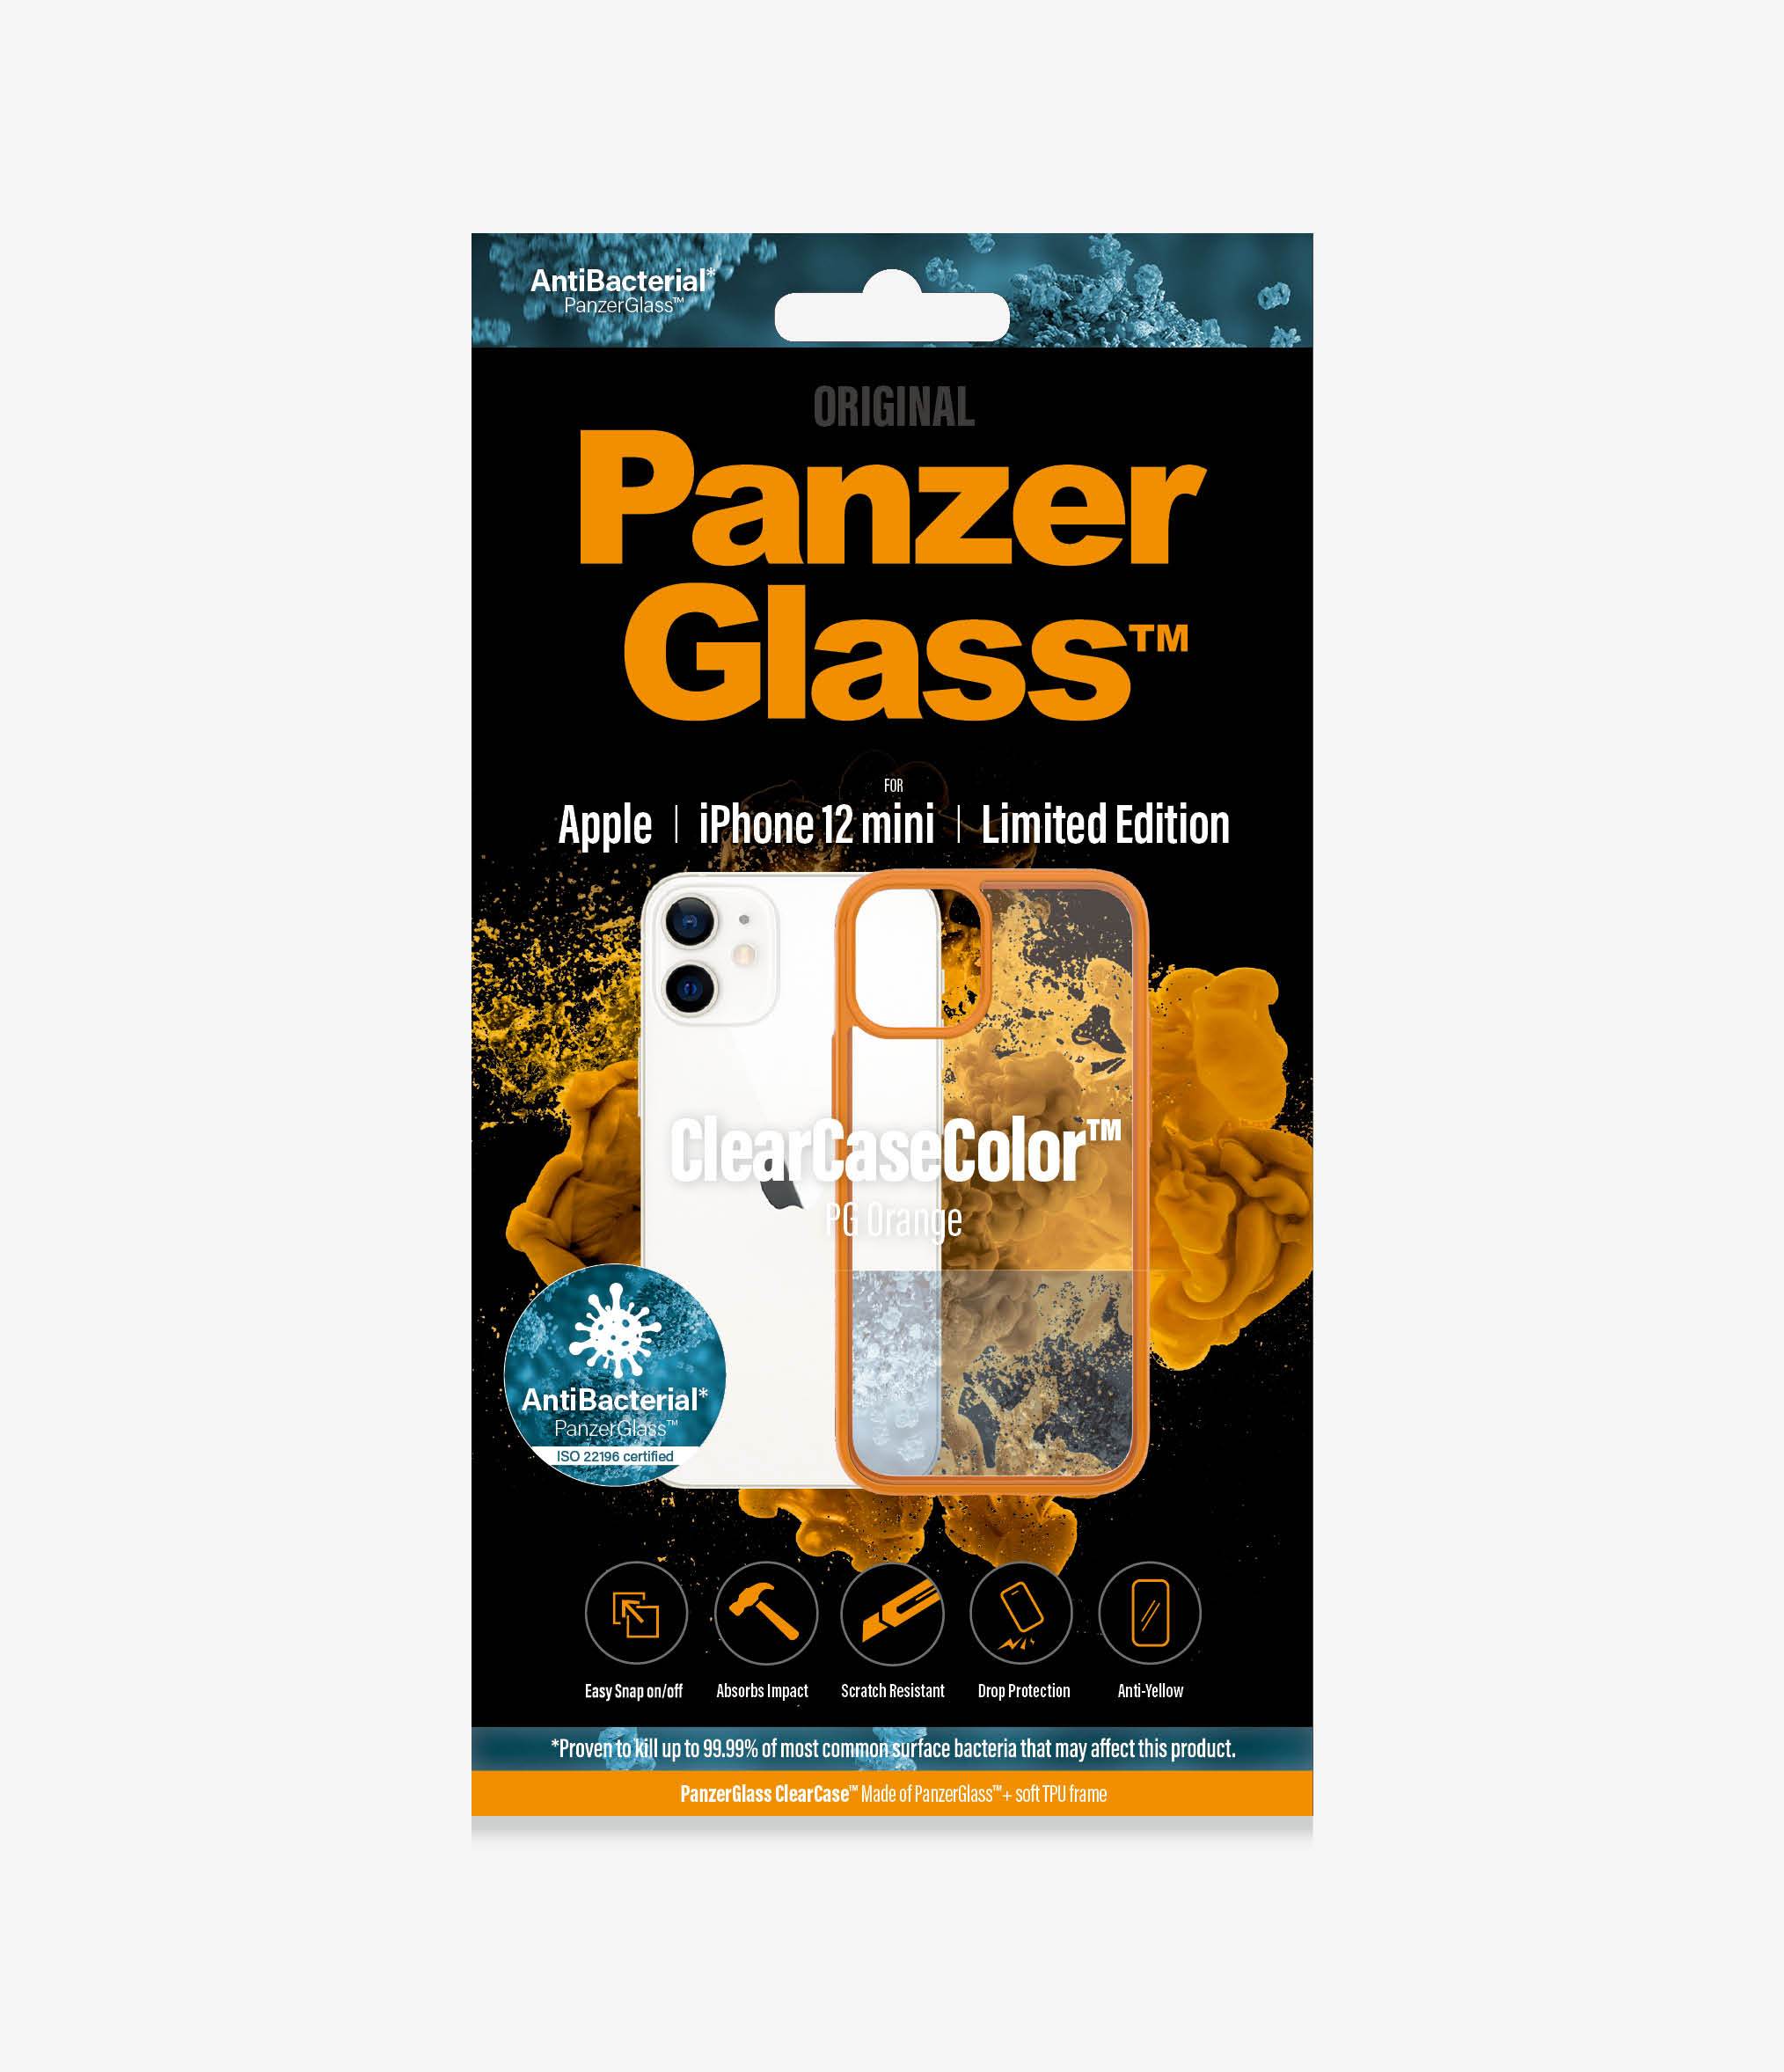 PanzerGlass™ ClearCaseColor™ Apple iPhone 12 mini - PanzerGlass Orange Limited Edition (0282), Slim fashionable design, Tempered anti-aging glass back